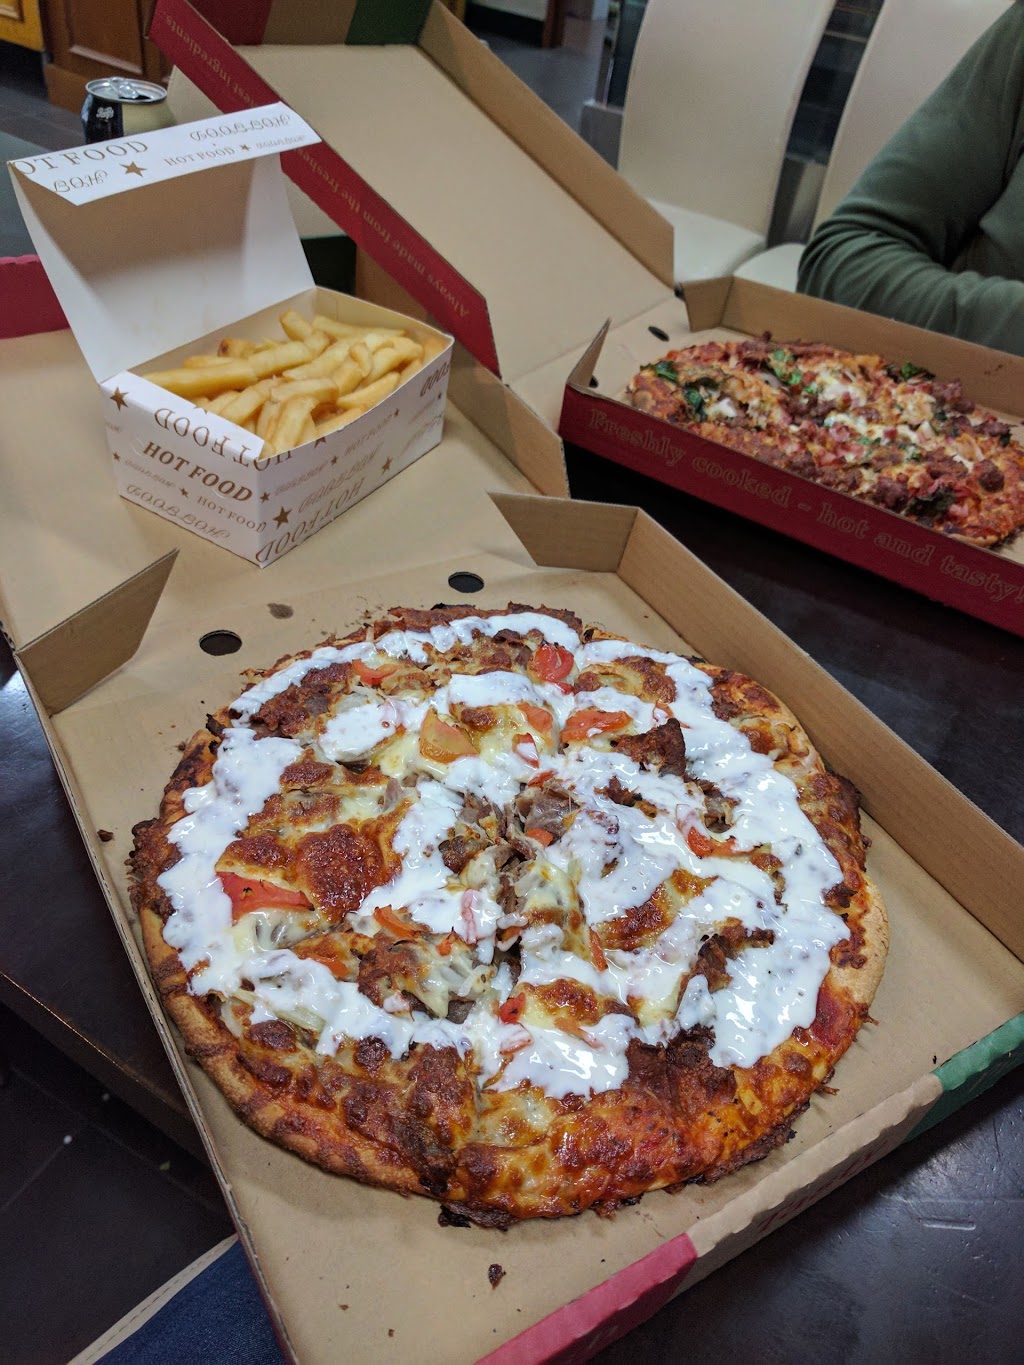 Fat Chefs Pizzeria - Ferntree Gully | meal delivery | 10/101 Station St, Ferntree Gully VIC 3156, Australia | 0397523237 OR +61 3 9752 3237